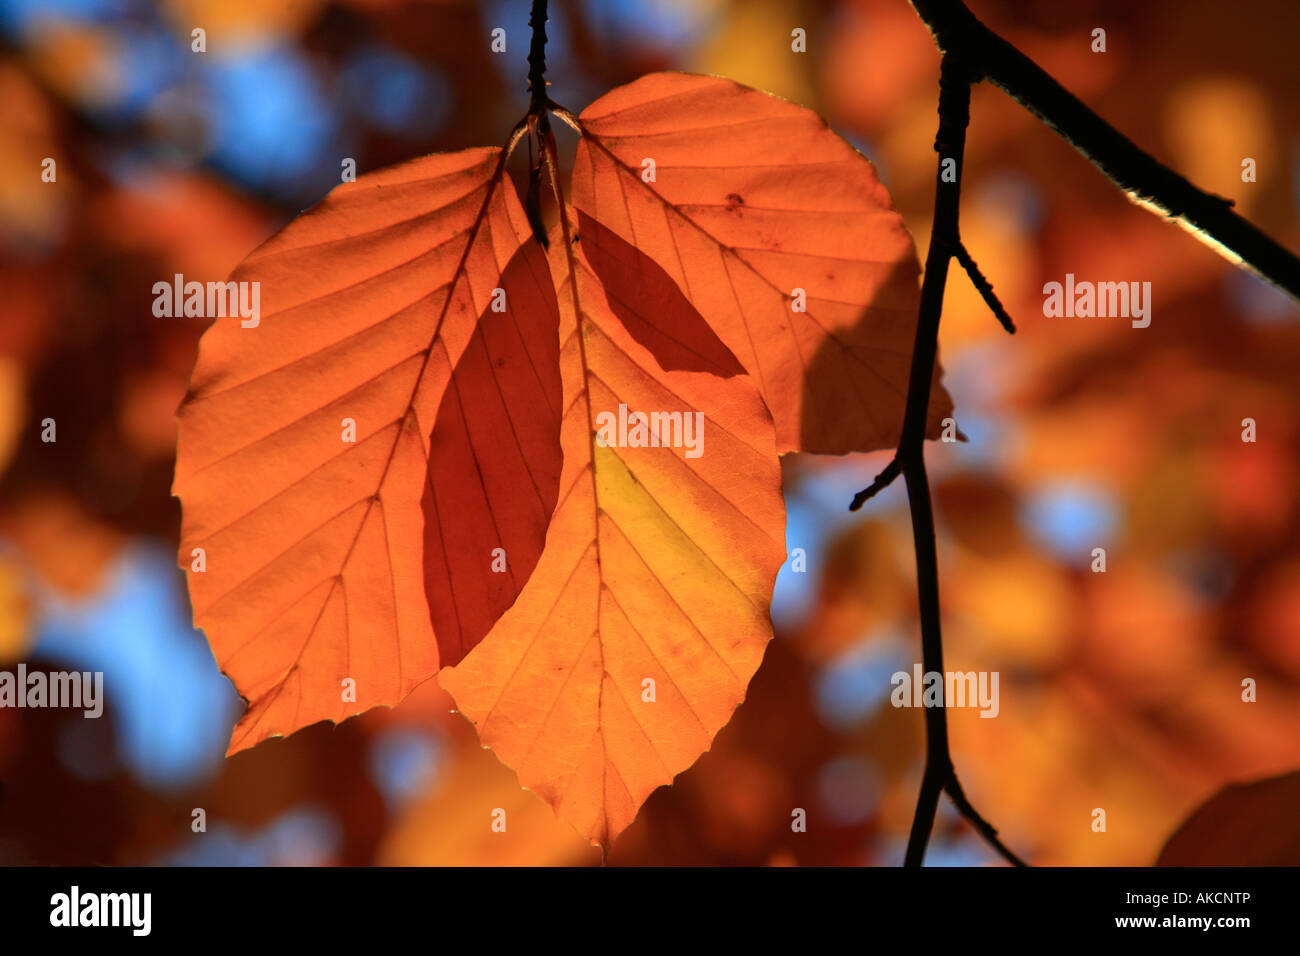 Vibrant natural reddish, copper colour leaves of European beech or common beech tree (Fagus sylvatica) in beautiful late autumn day with blue sky Stock Photo